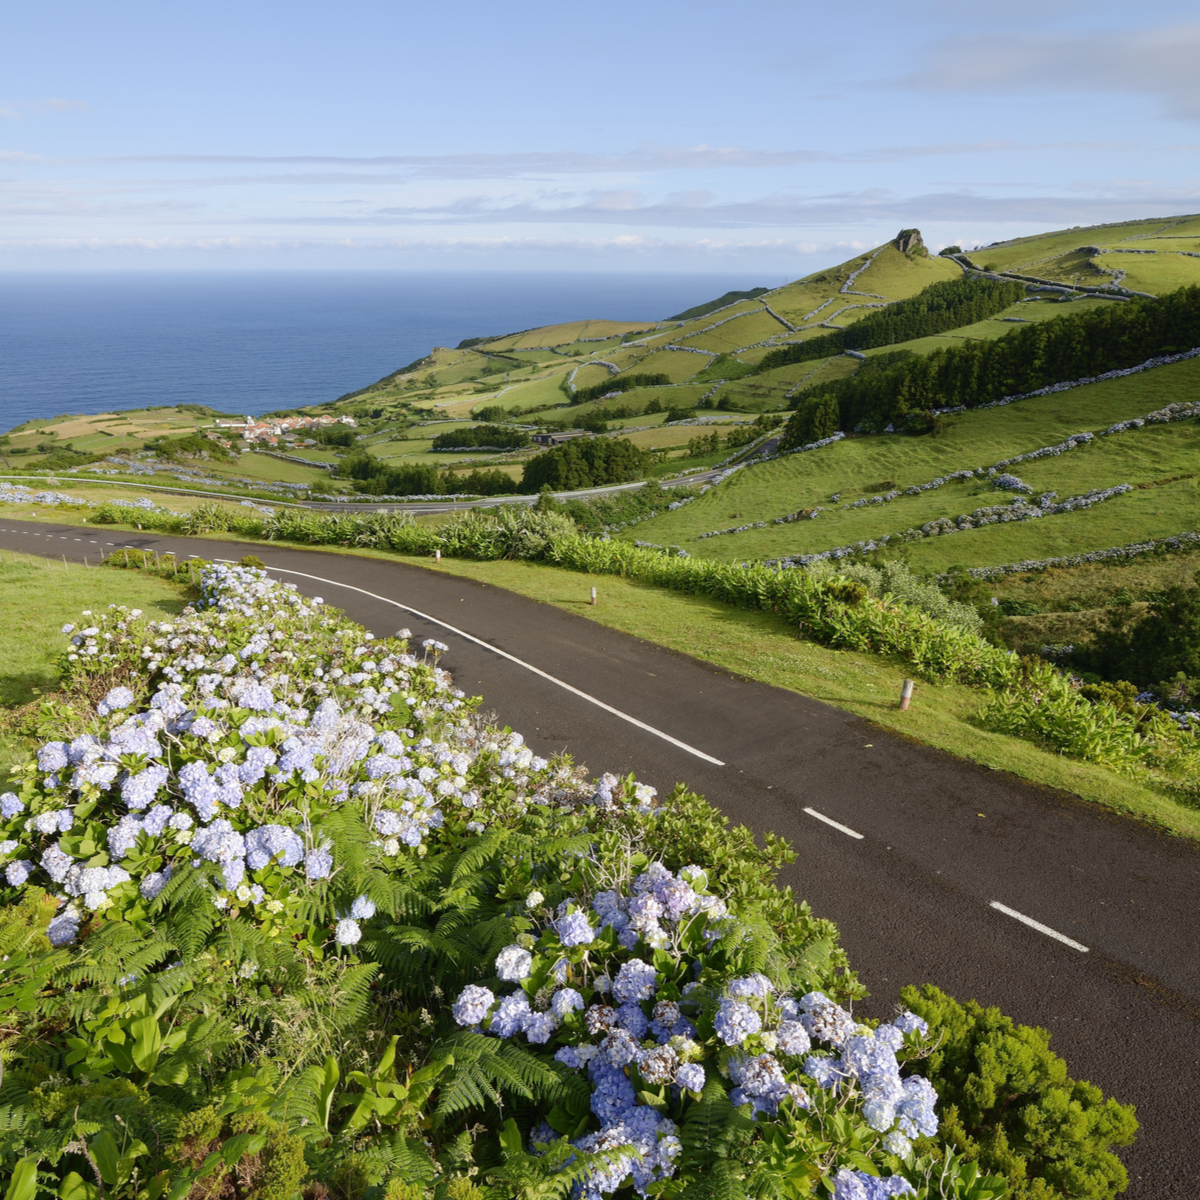 azores group tours